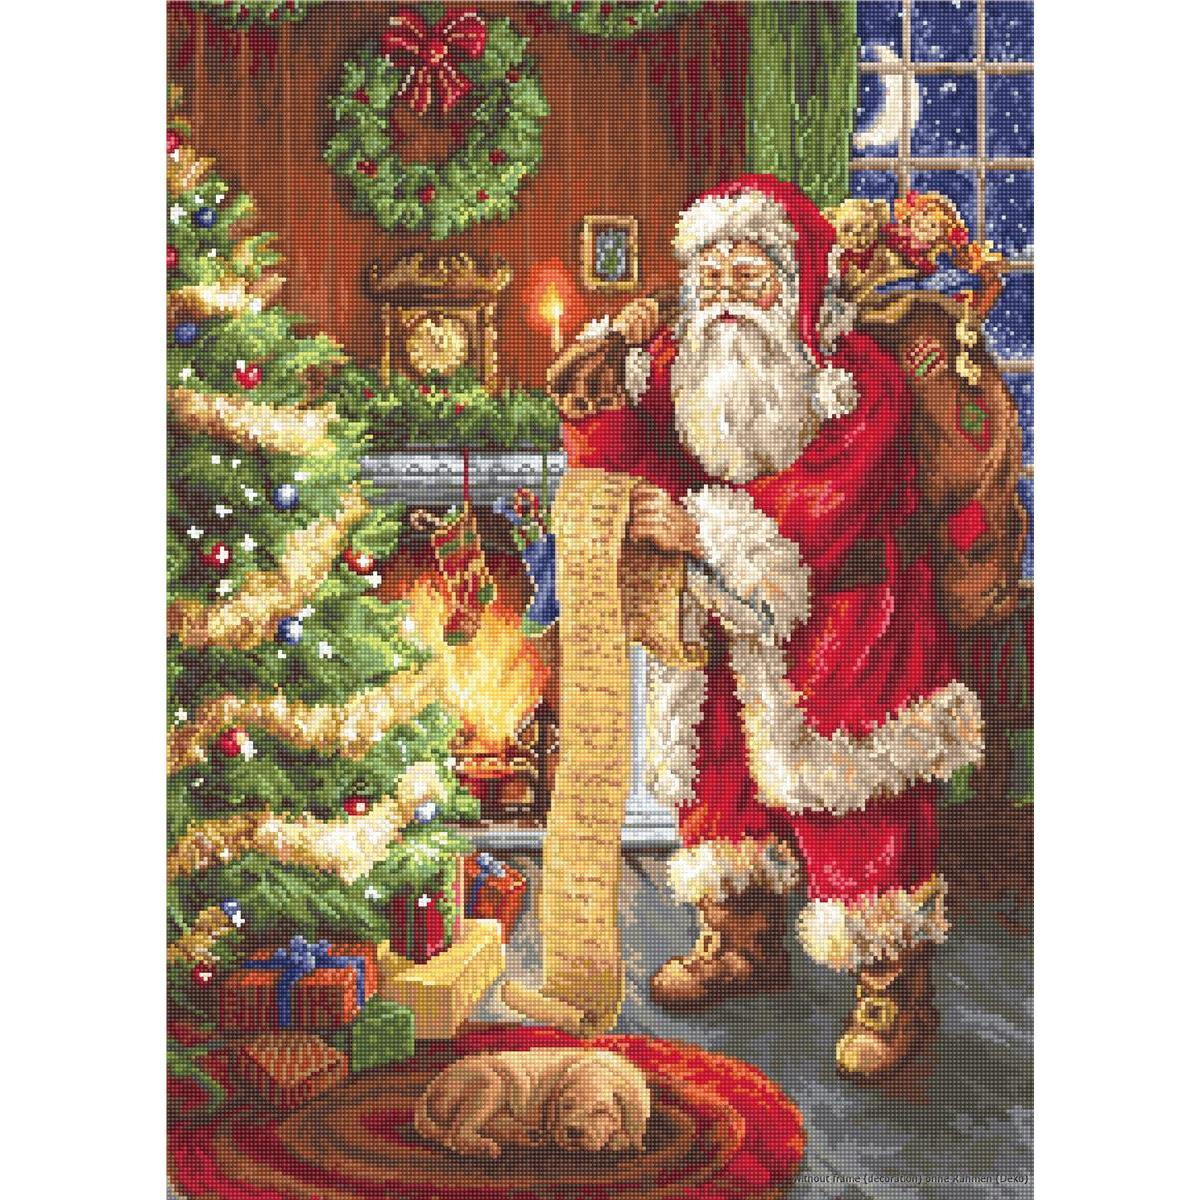 A festive scene shows Santa Claus with a long list in his...